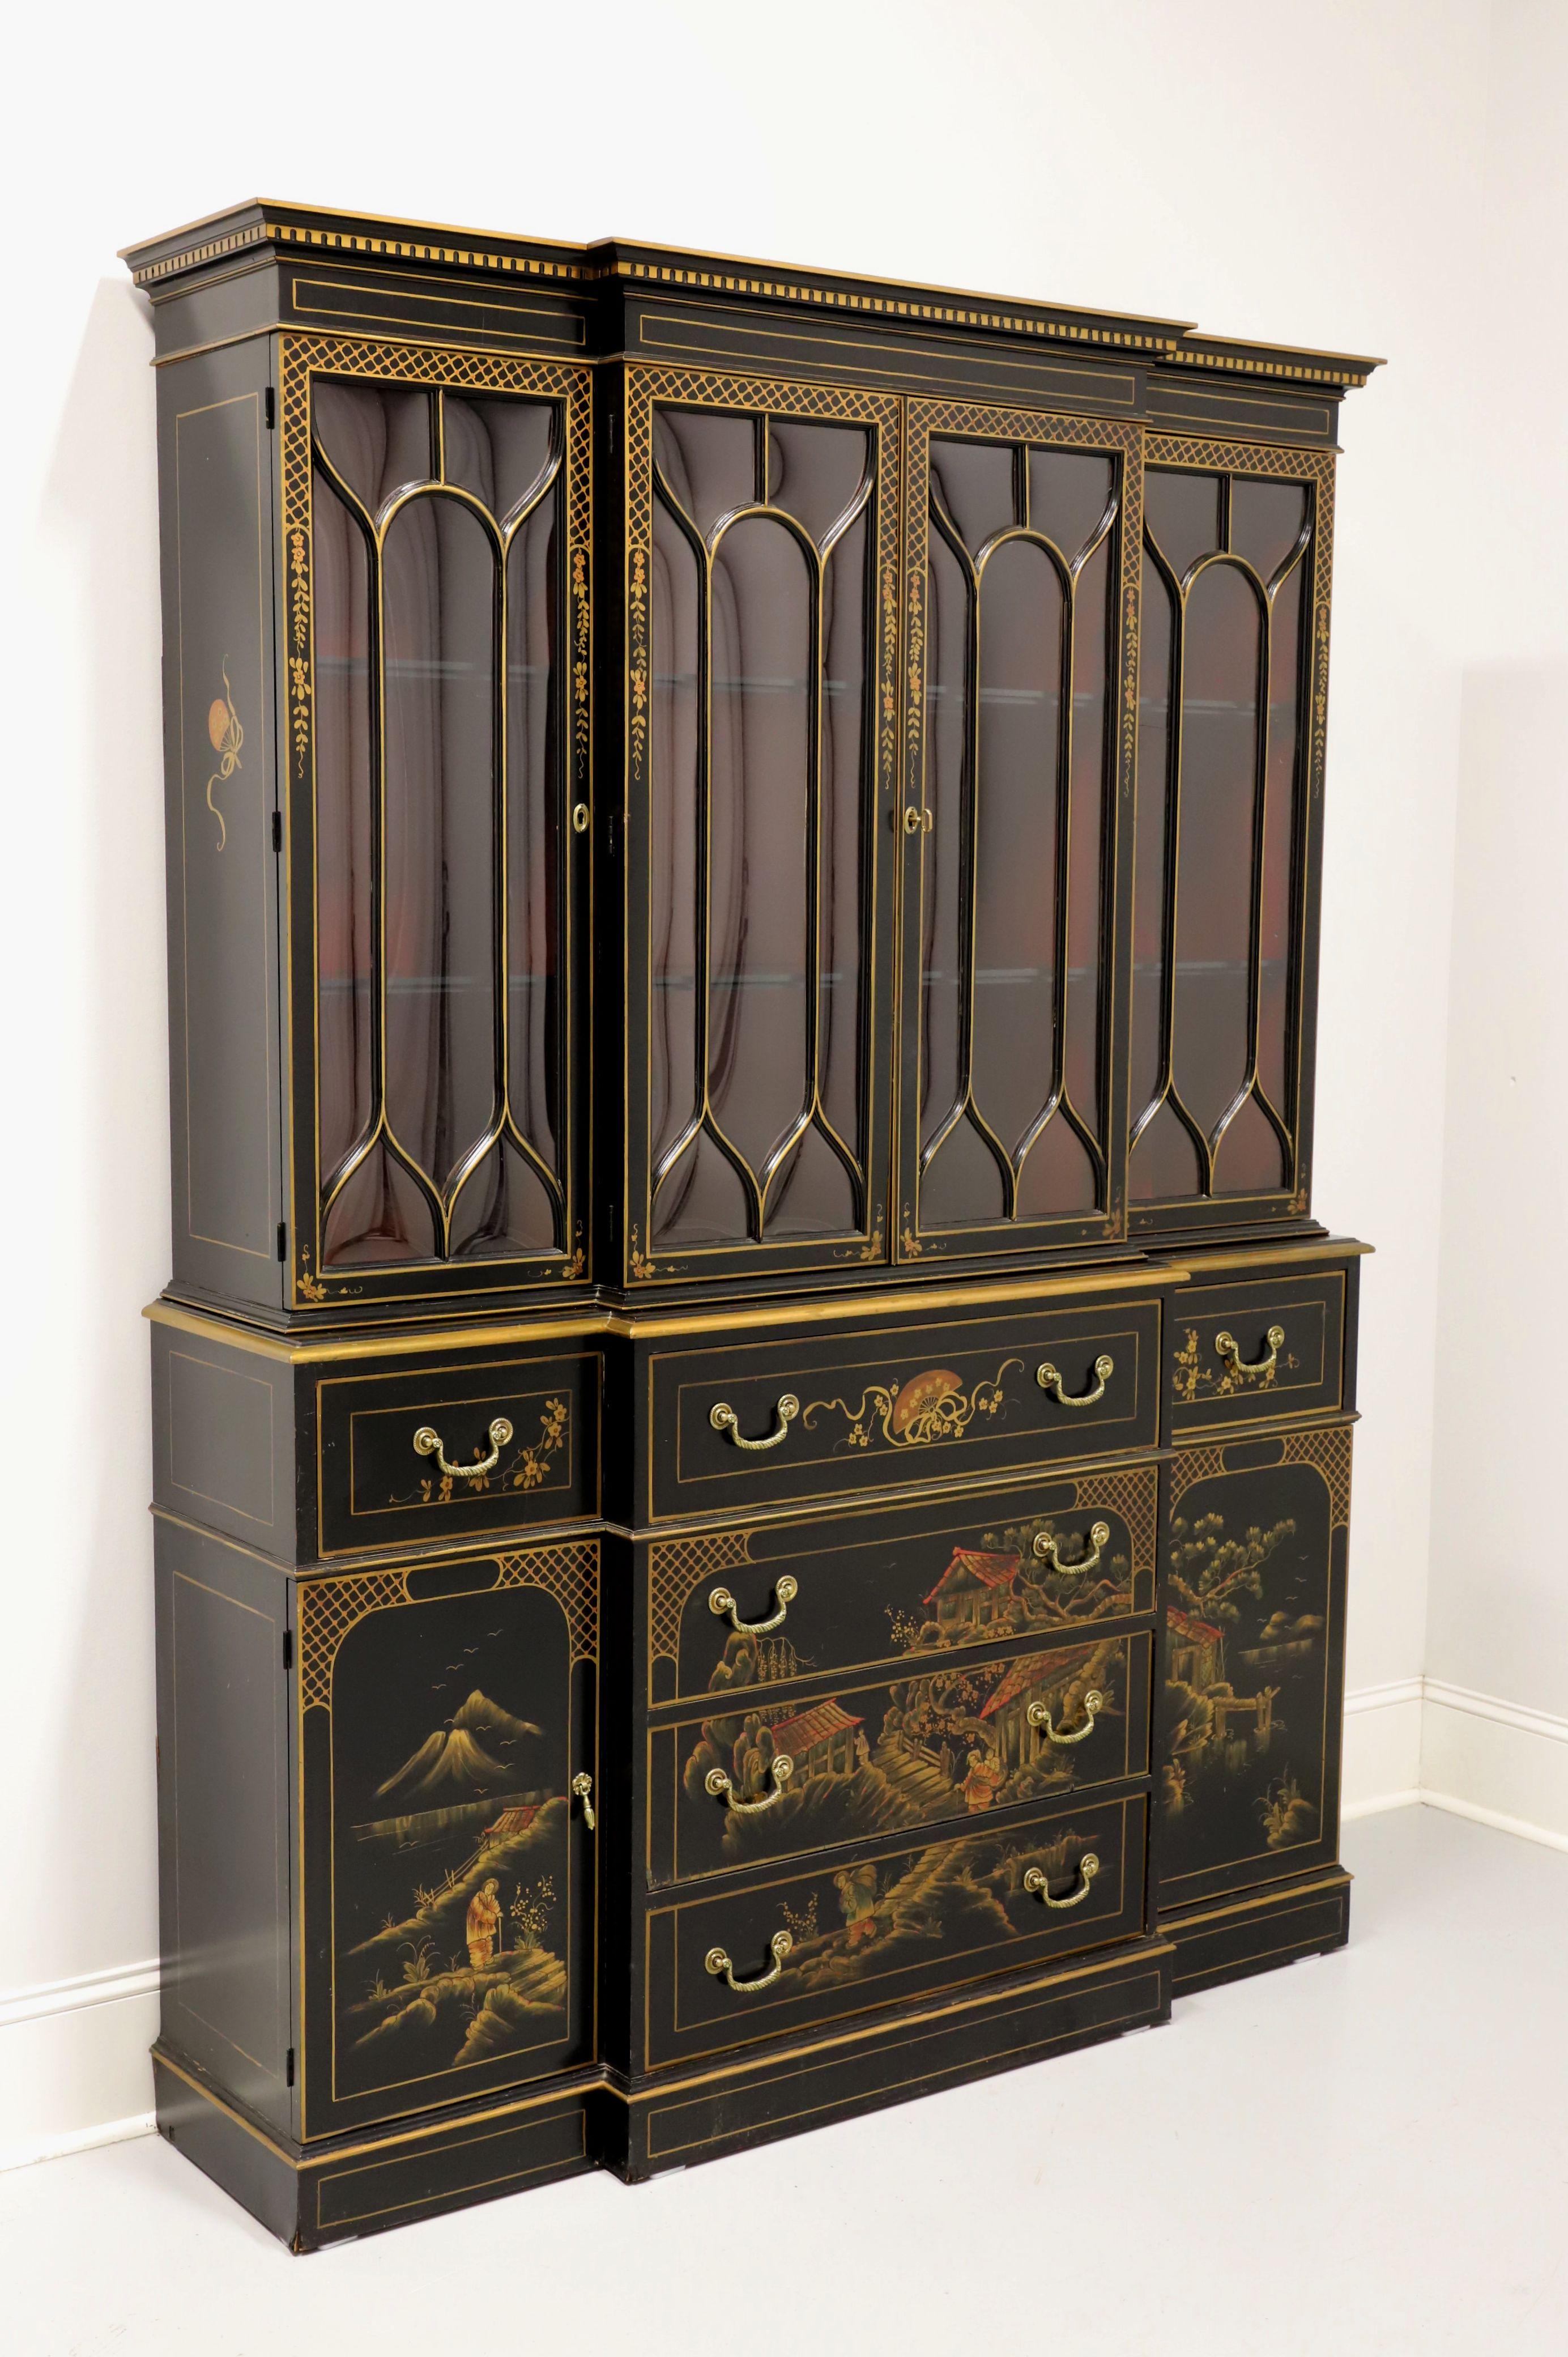 A breakfront china cabinet, with secretary desk, in the Asian Chinoiserie style, by Union-National. Solid hardwood with hand painted Chinoiserie scenes & gold accents on black lacquer, brass hardware, crown & dentil moulding to top, bevel edge to